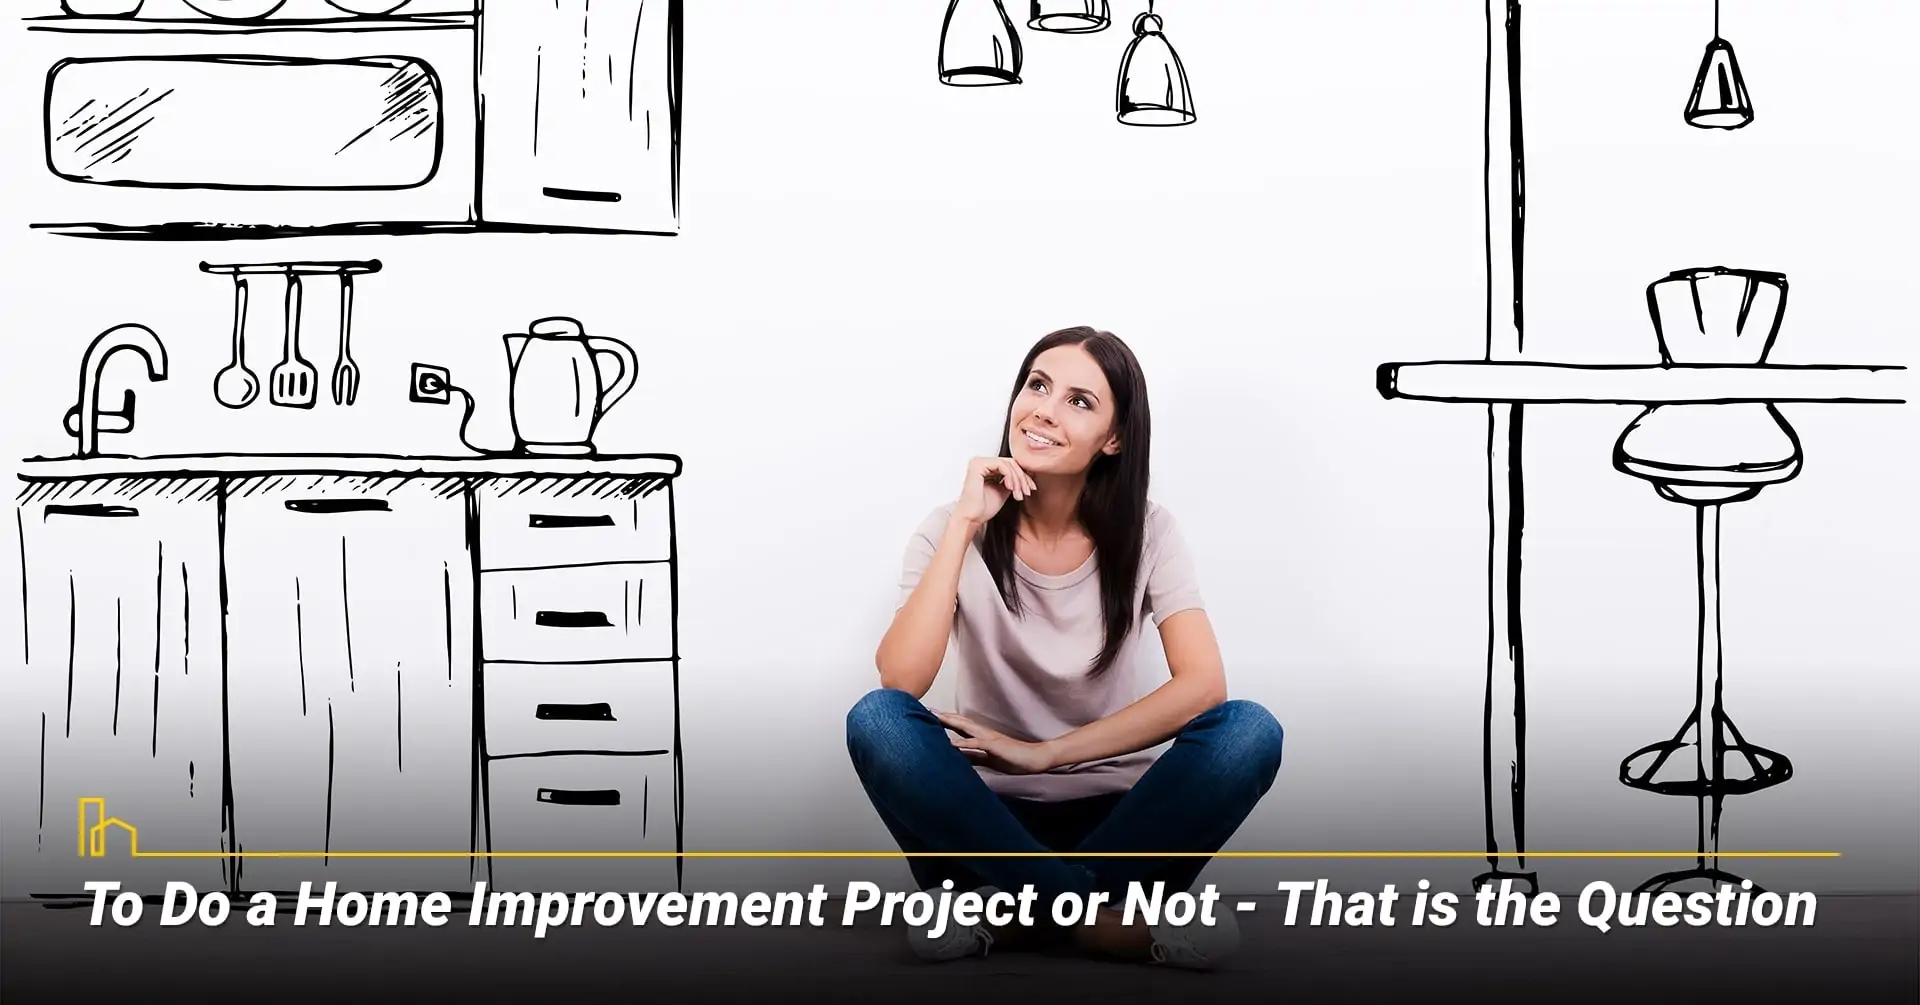 To Do a Home Improvement Project or Not - That is the Question, reasons to do a home improvement projects